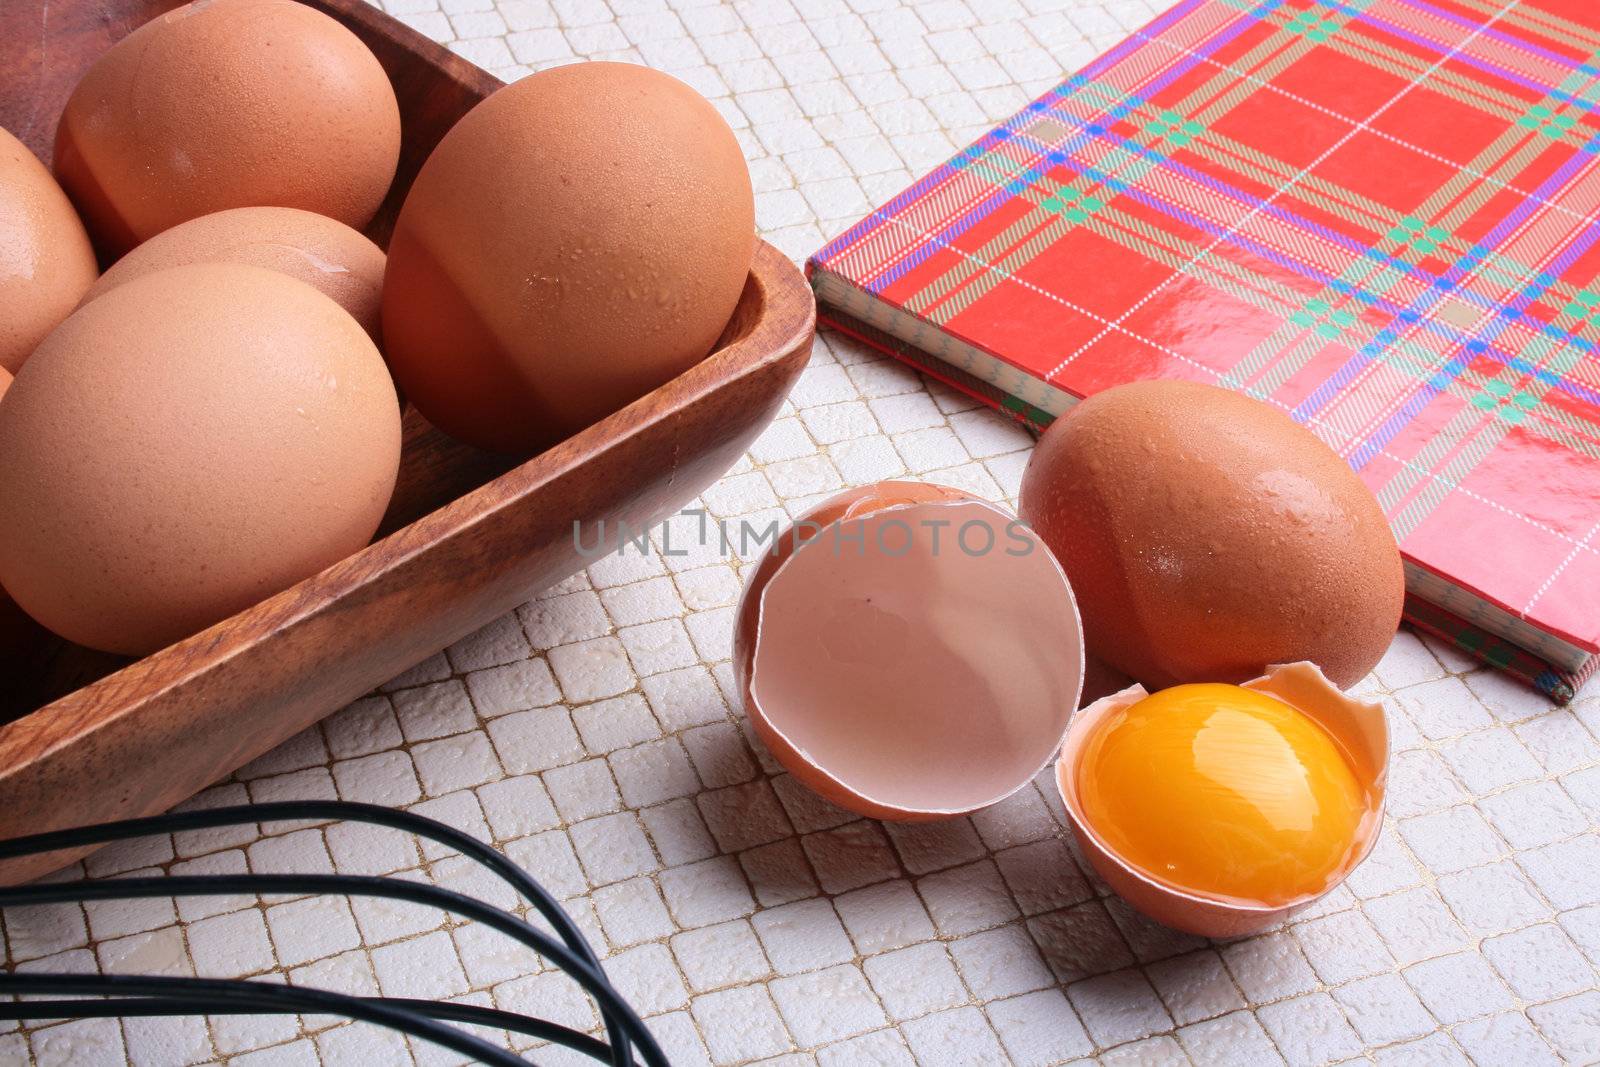 Book for recipes on a kitchen table with eggs and a beater.